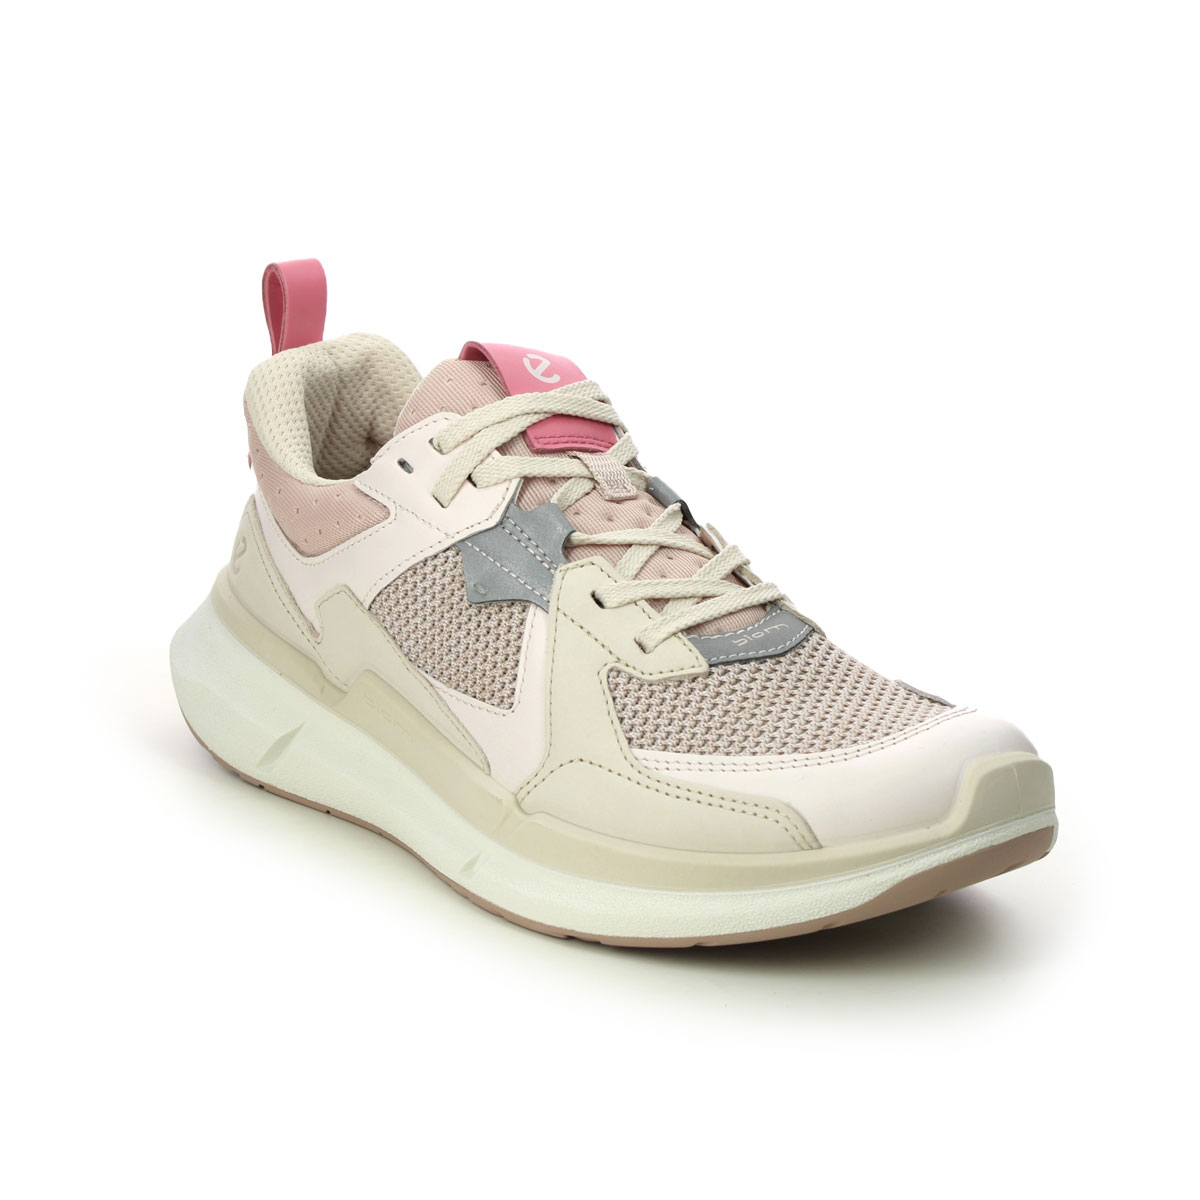 ECCO Biom 2.2 Ladies Rose leather Womens trainers 830773-60942 in a Plain Leather in Size 41